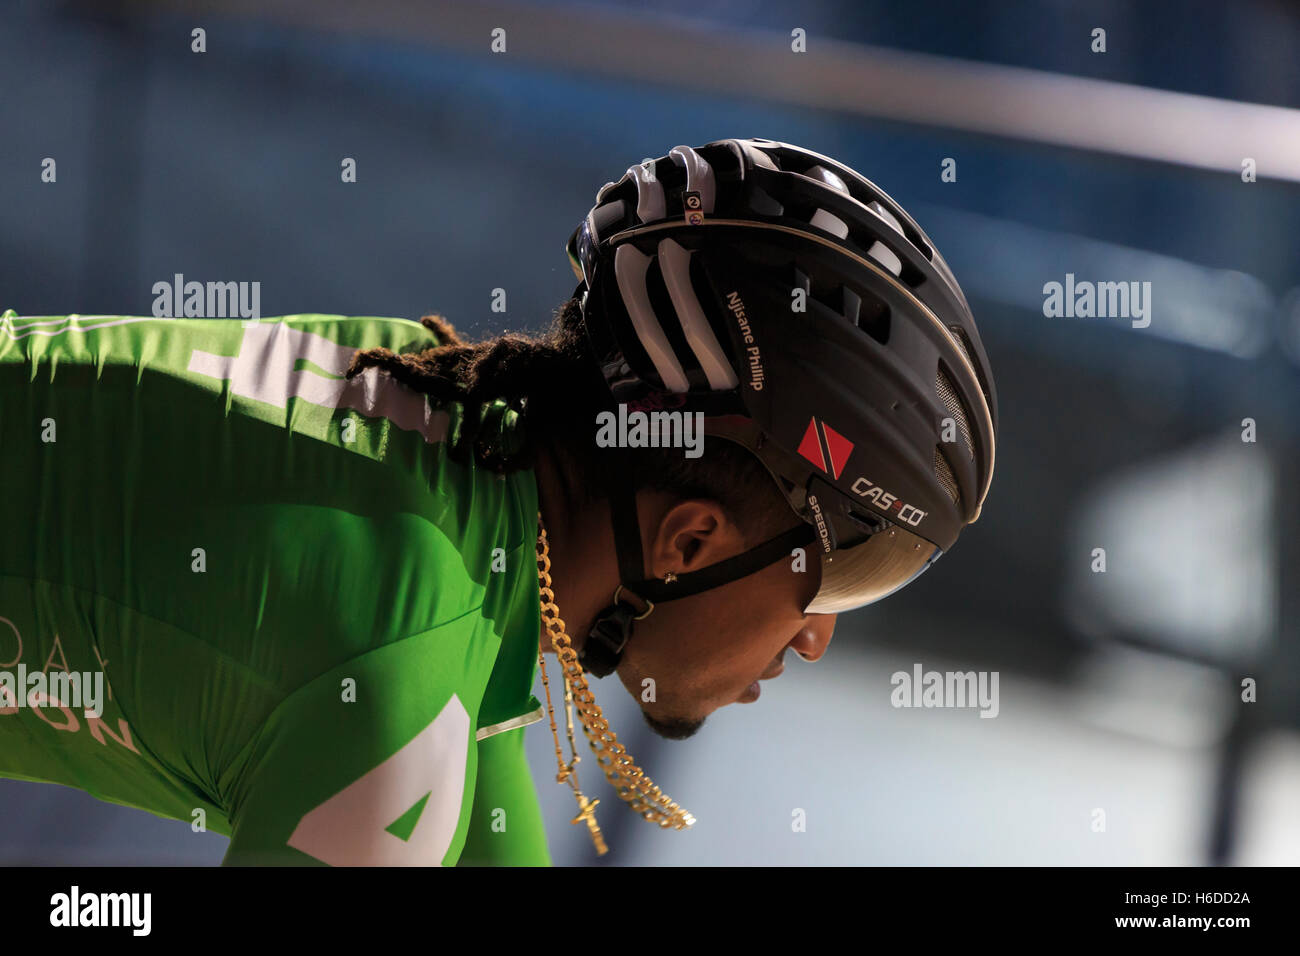 Lee Valley VeloPark, London, UK, 26 October 2016. Second day of Six Day London. Sprinter Njisane Phillip (Trinidad & Tobago) during a track stand in the Sprint event on day two of the six day cycling competition centred around the Madison. This will be the last event that Wiggins competes in in the UK. Stock Photo